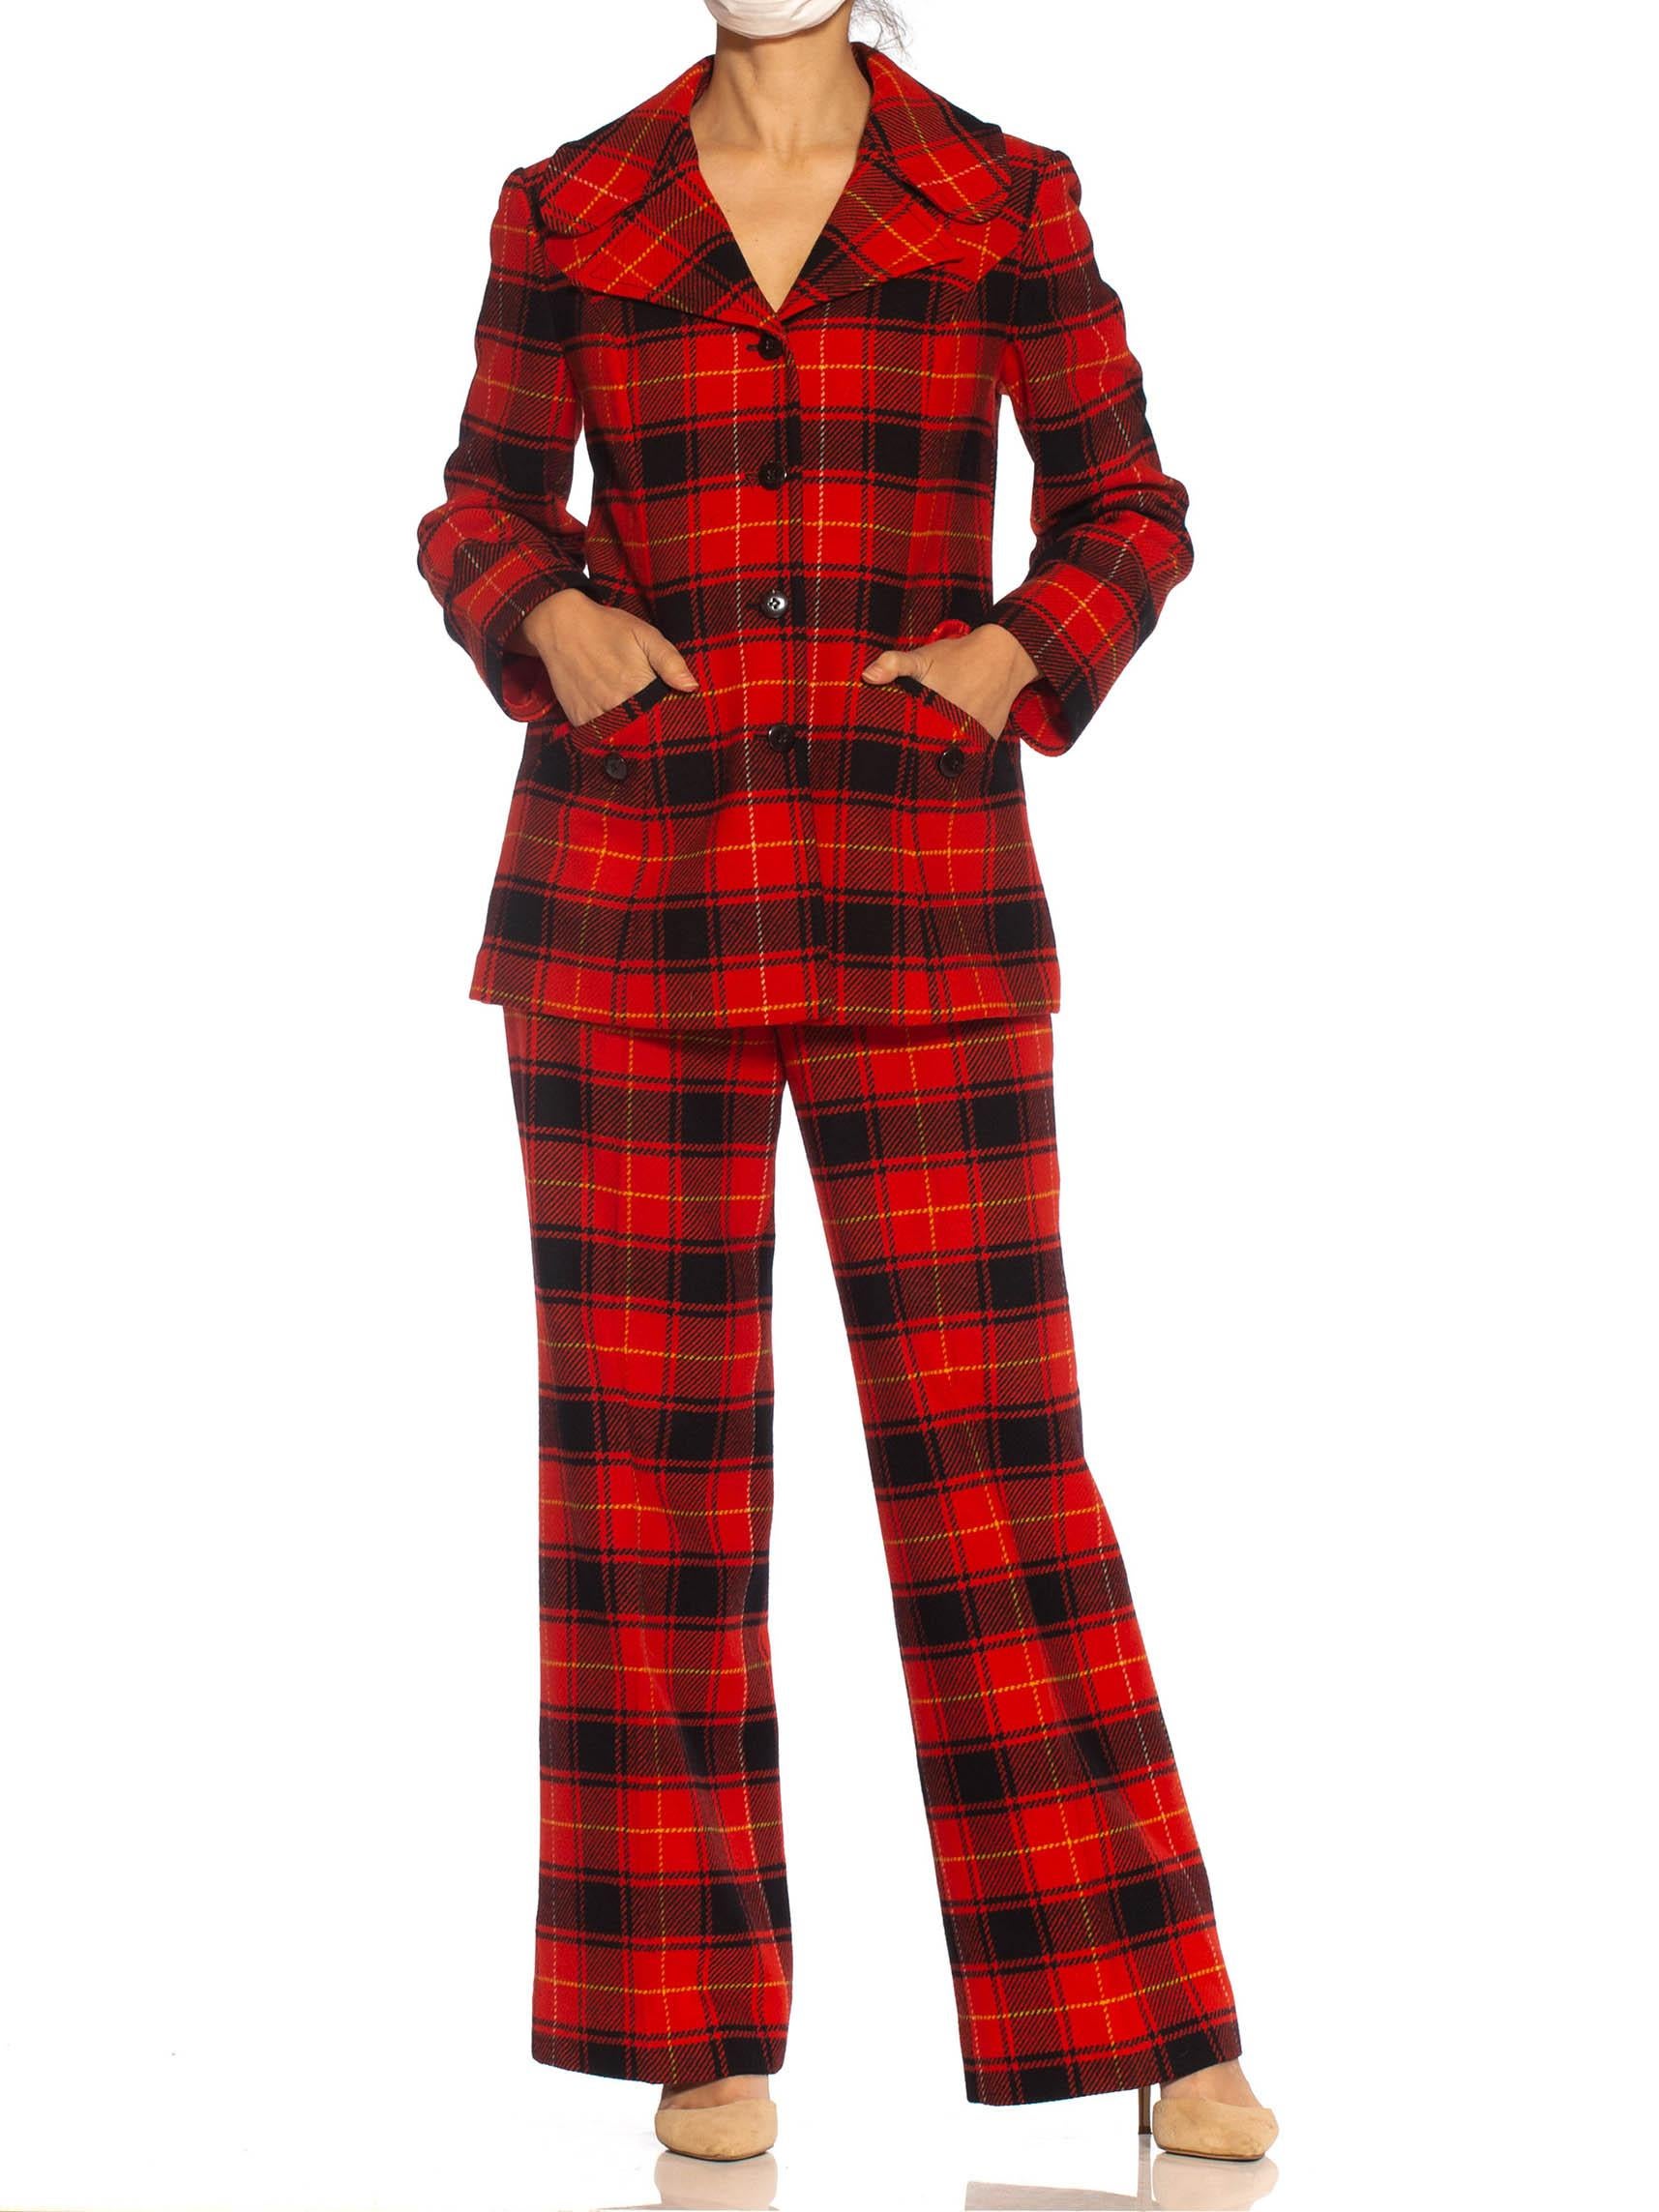 1960S PENDLETON Red & Black Plaid Wool Fully Lined, Wide Lapel Pant Suit In Excellent Condition For Sale In New York, NY